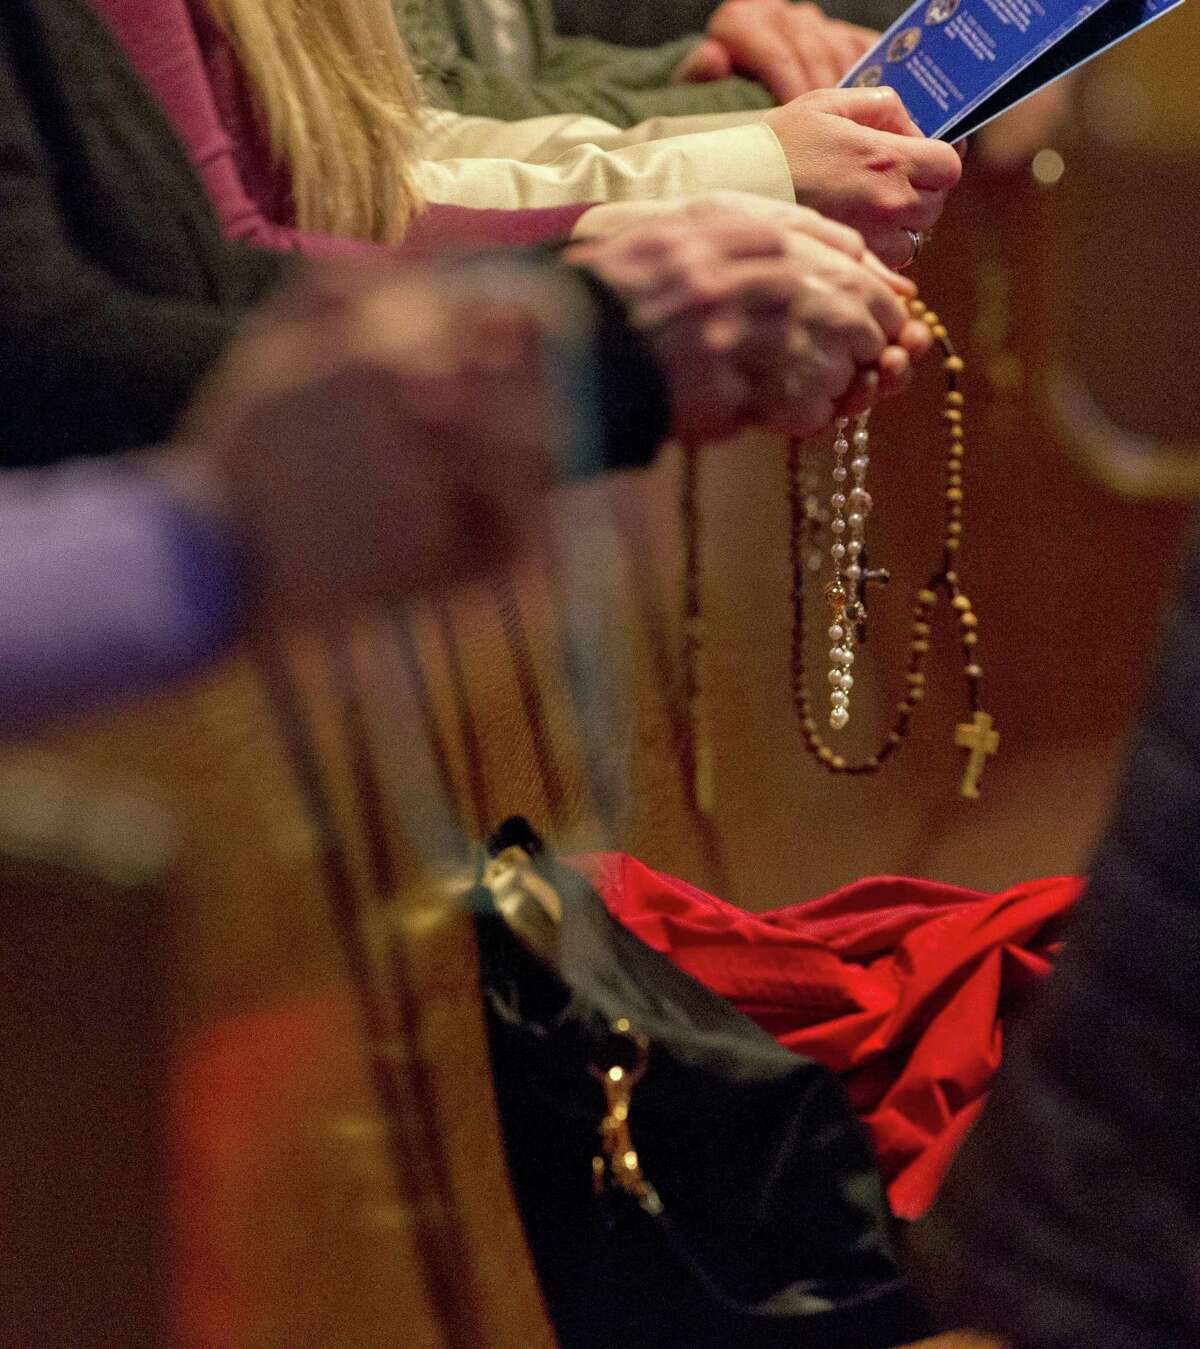 Worshipers hold rosaries as they pray at St. Anthony of Padua Catholic Church, Thursday, Jan 31, 2019, in The Woodlands. The Archdiocese of Galveston-Houston released names of more than 40 priests, clergy and staff 'credibly' accused of sexual abuse or misconduct with a minor since 1950.